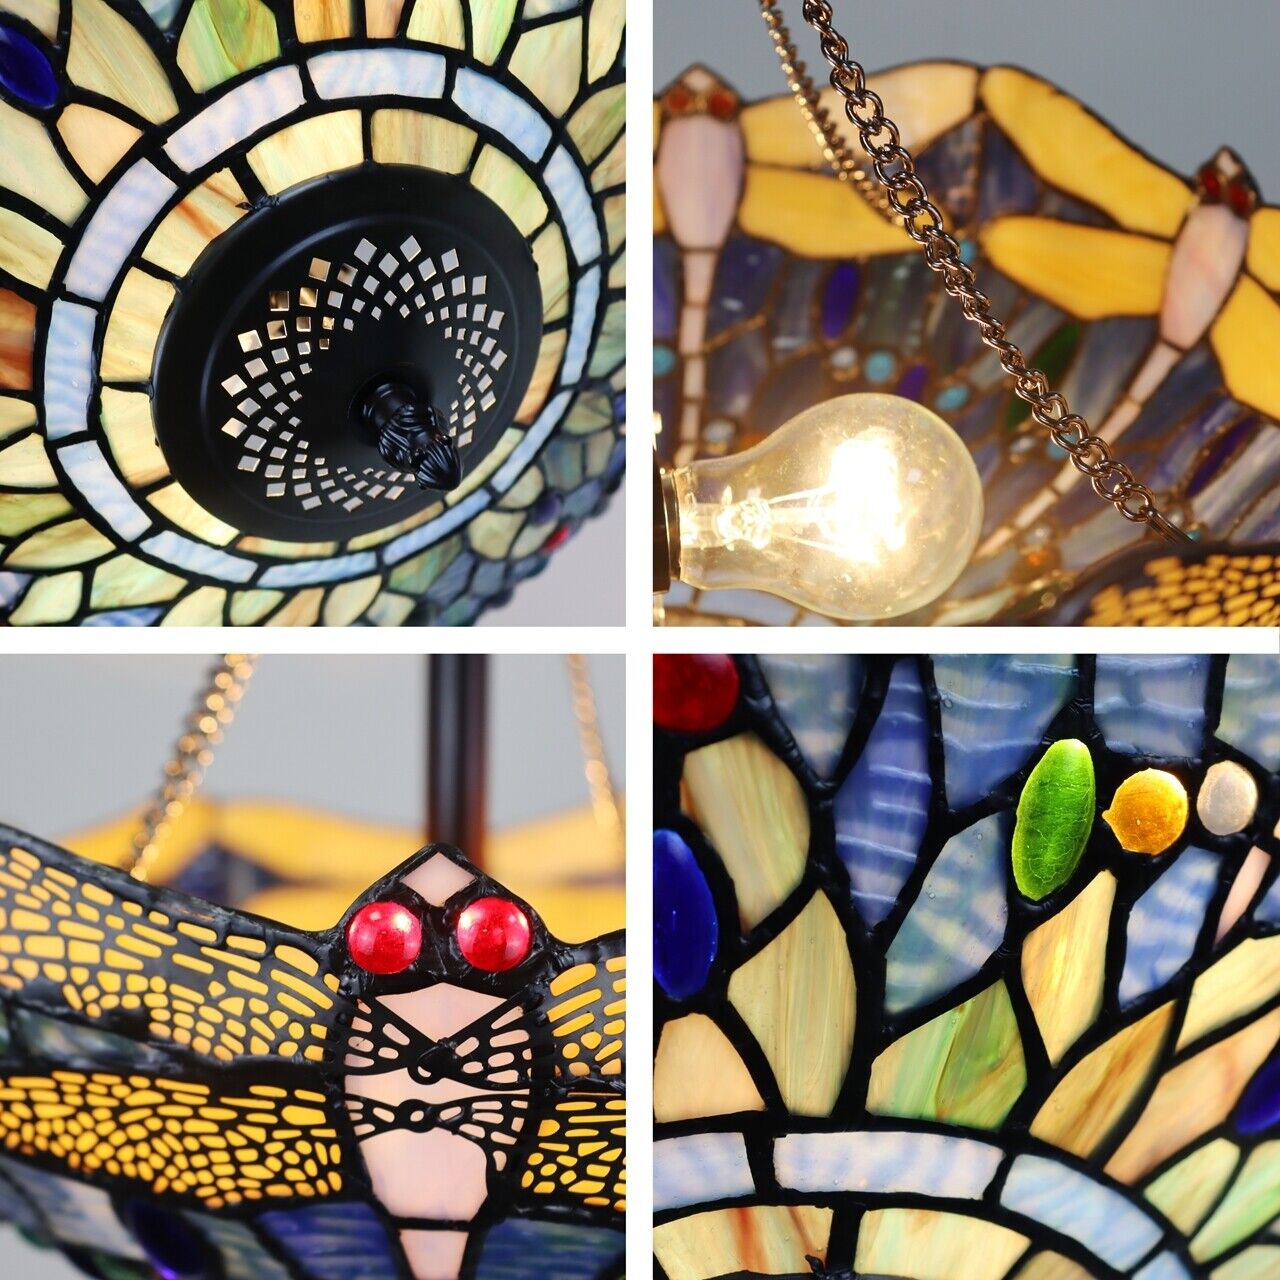 16" Dragonfly Stained Glass Semi Flush Ceiling Uplight